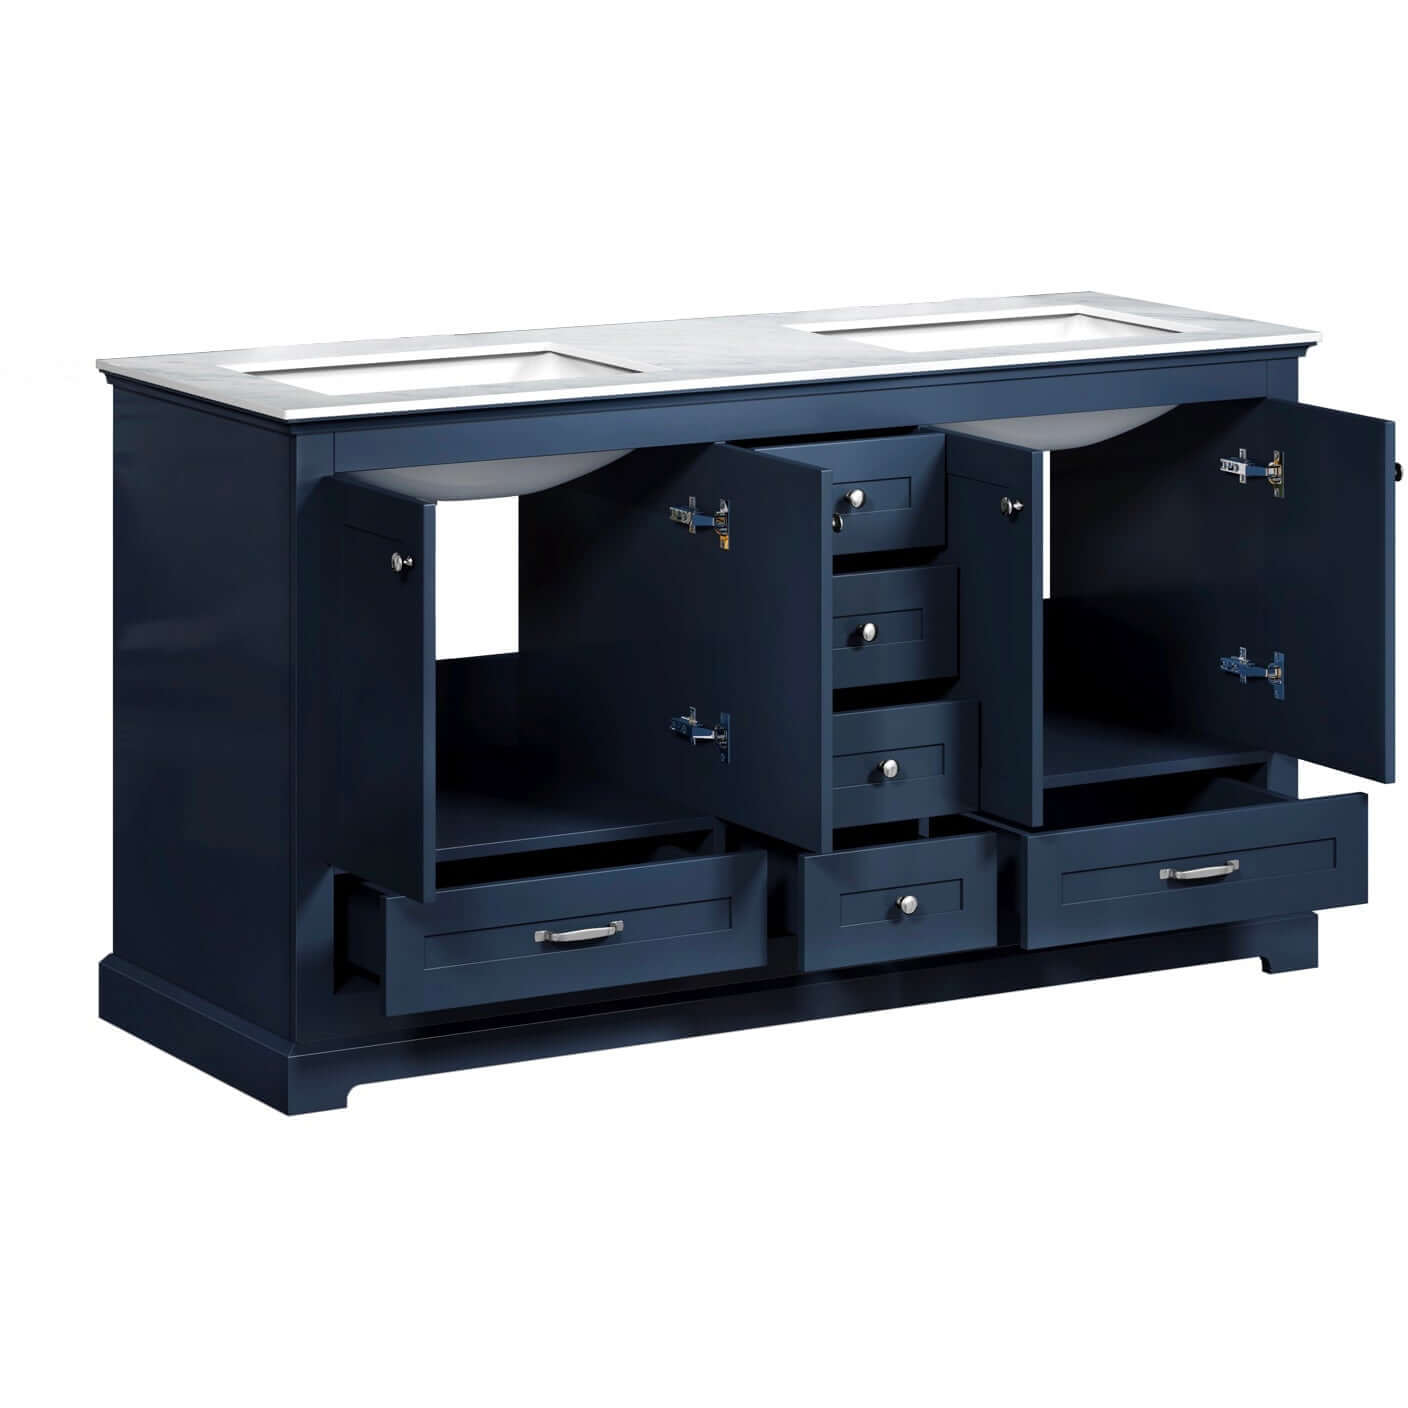 Dukes 60" Navy Blue Double Vanity, White Carrara Marble Top, White Square Sinks and no Mirror - LD342260DEDS000